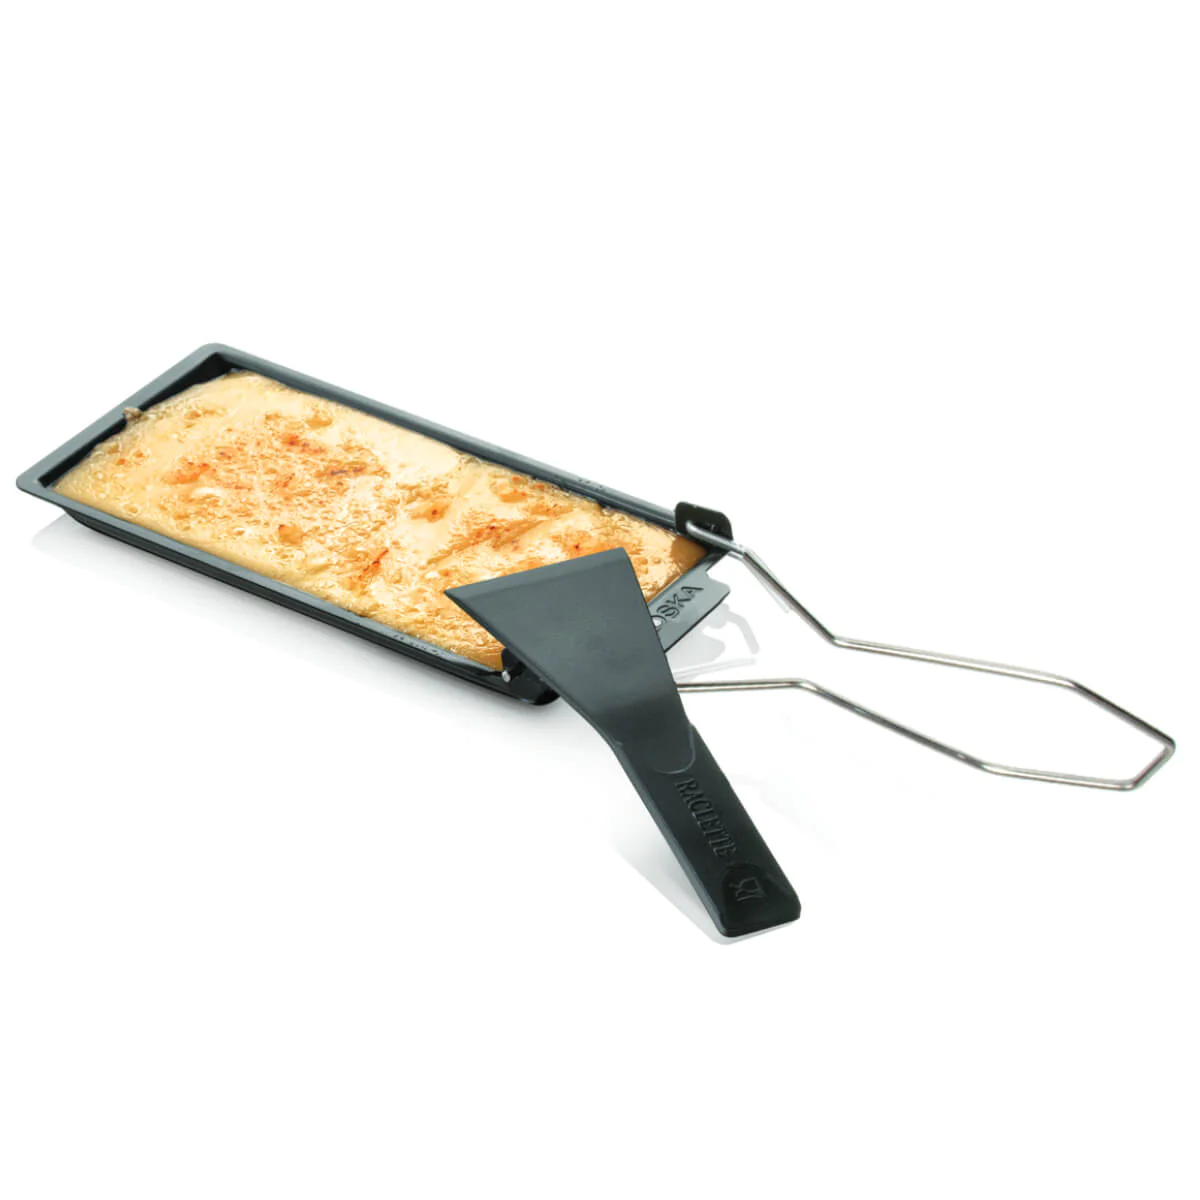 Cheese Barbeclette Melting Pan